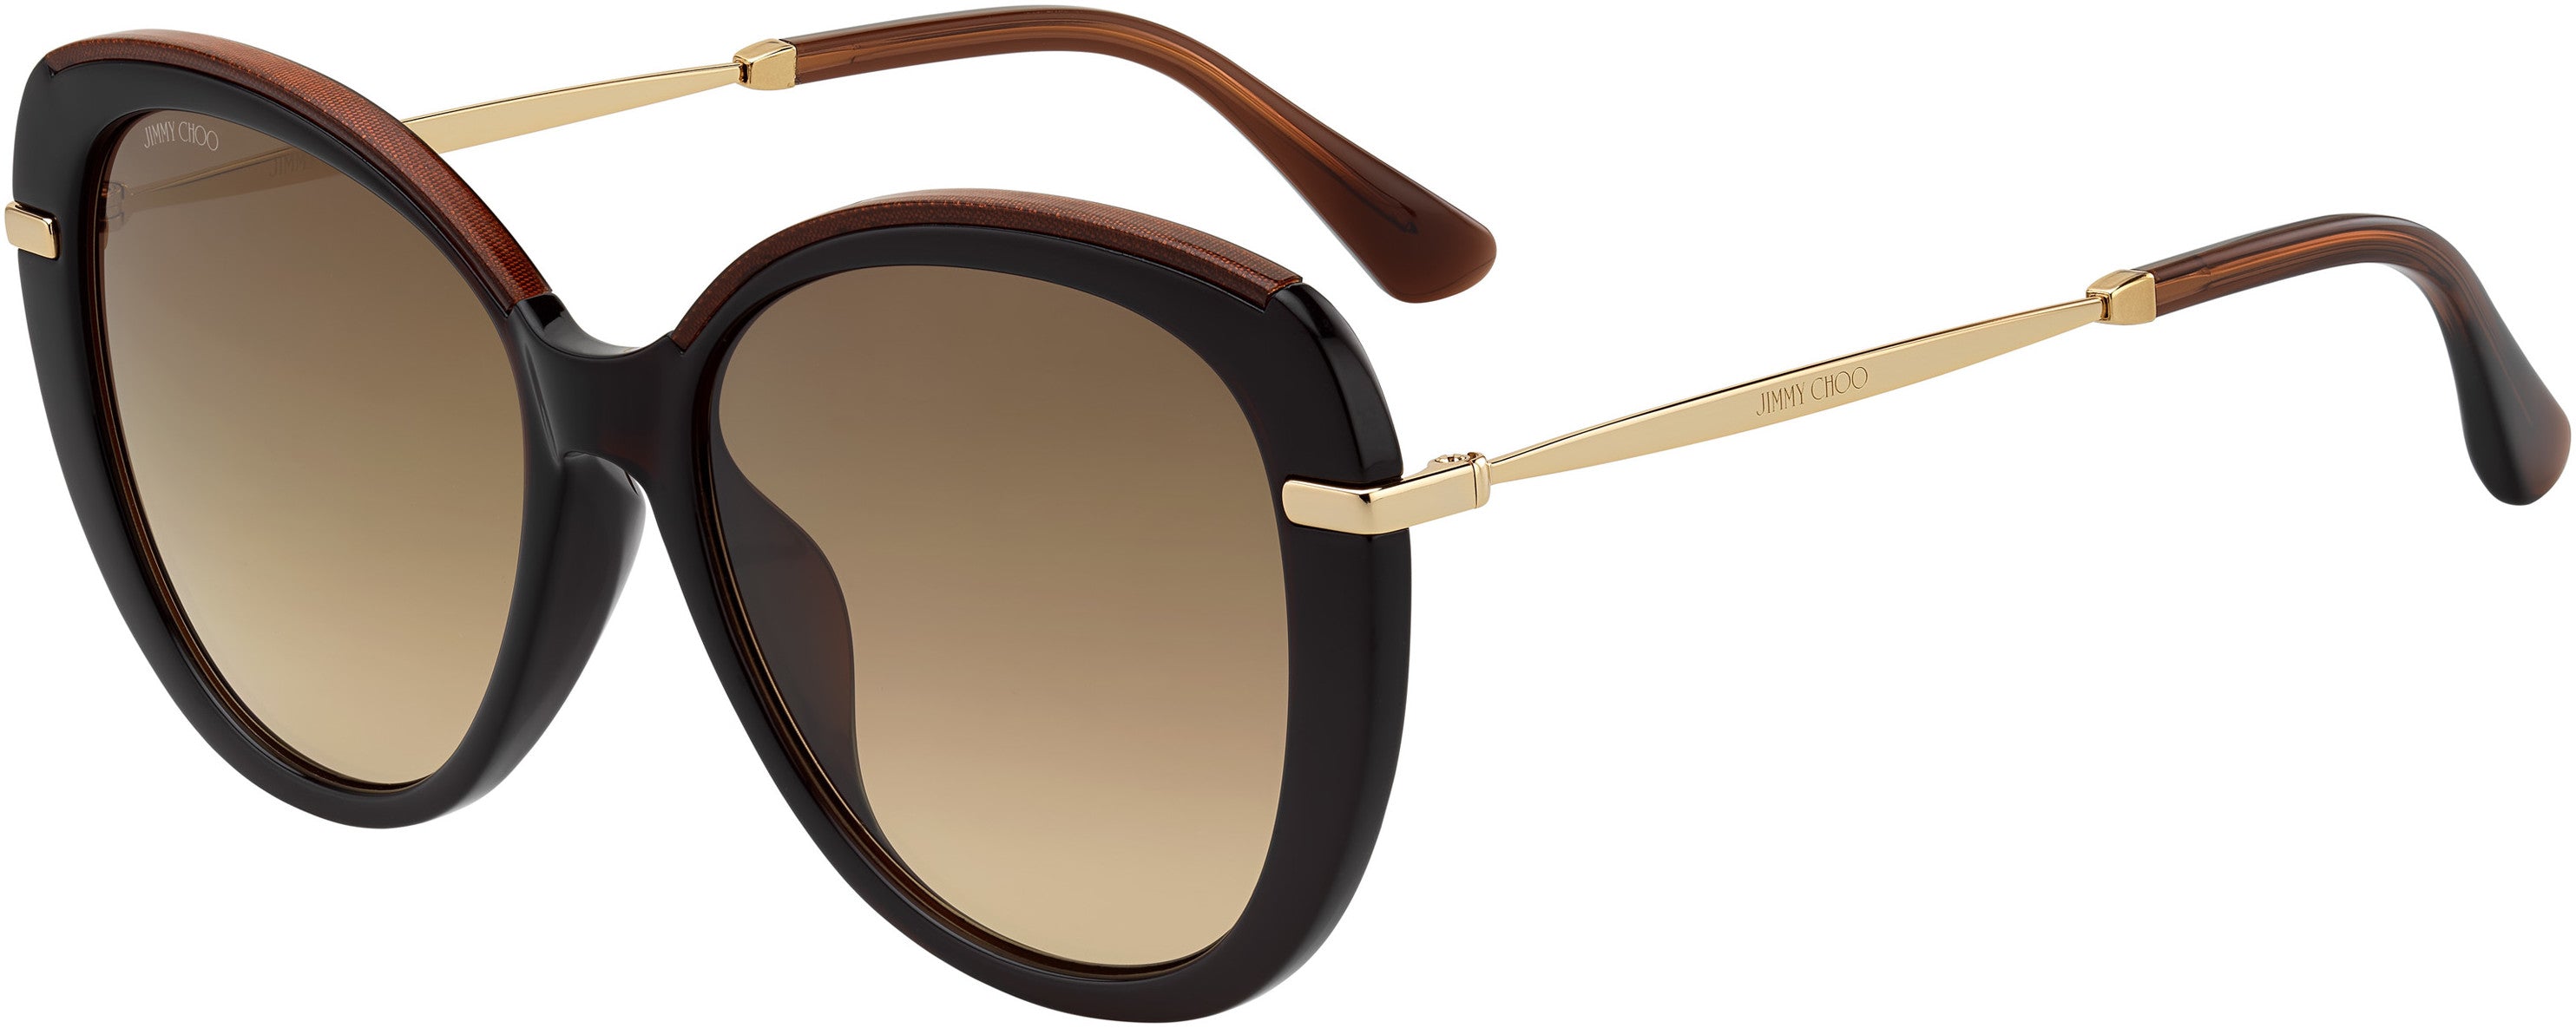 Jimmy Choo Phebe/F/S Oval Modified Sunglasses 02PI-02PI  Brown Gold Brown (HA Brown Gradient)